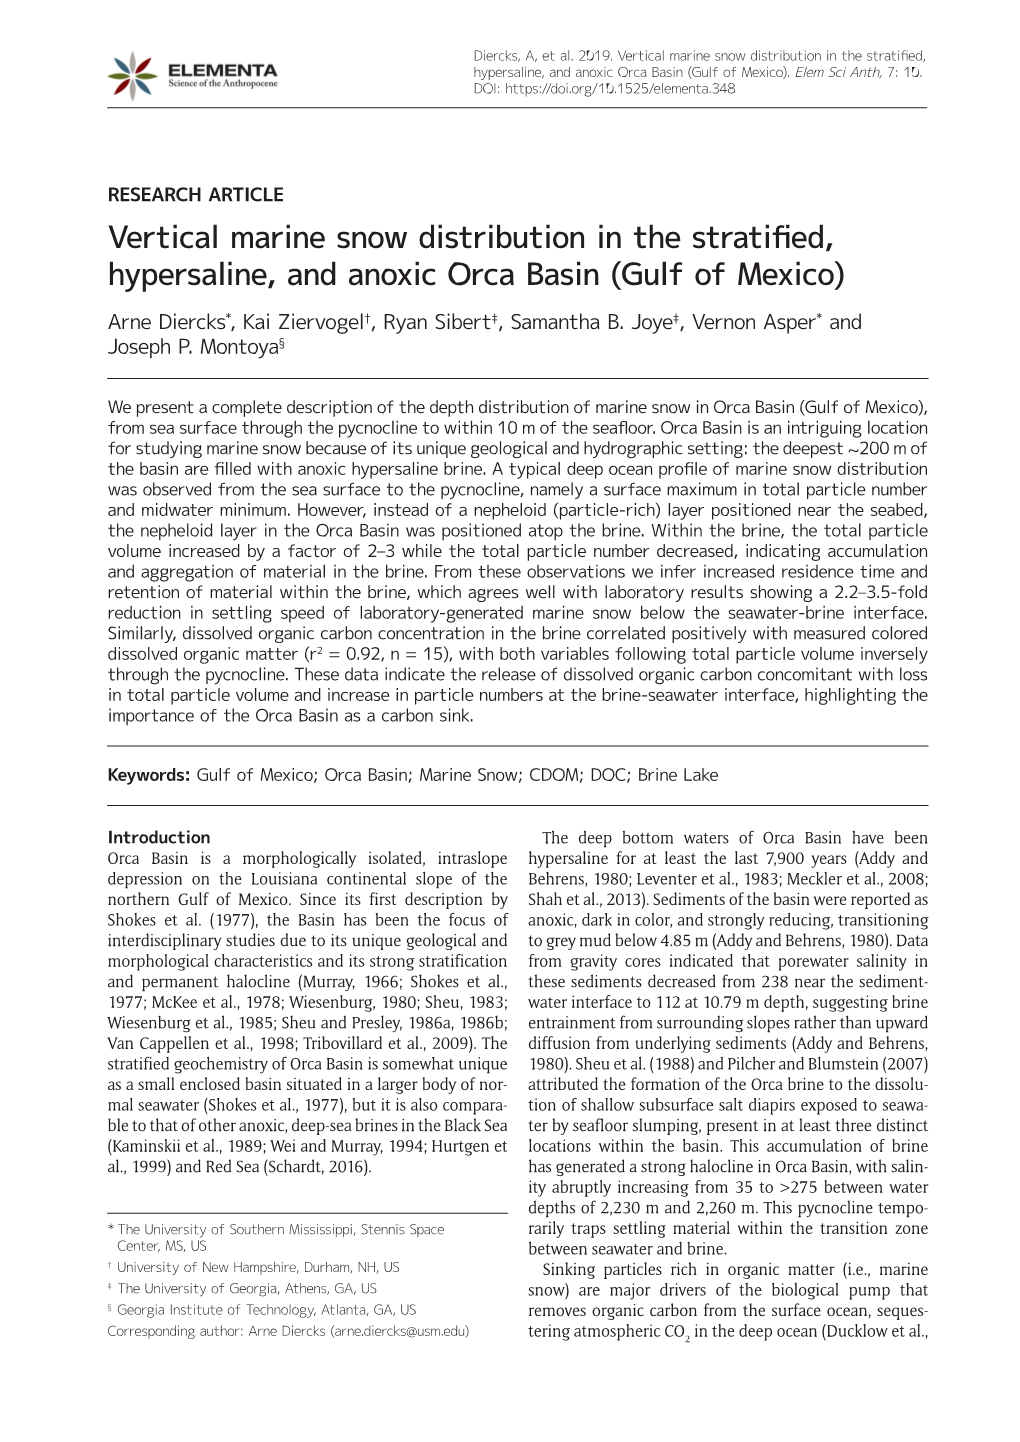 Vertical Marine Snow Distribution in the Stratified, Hypersaline, and Anoxic Orca Basin (Gulf of Mexico)